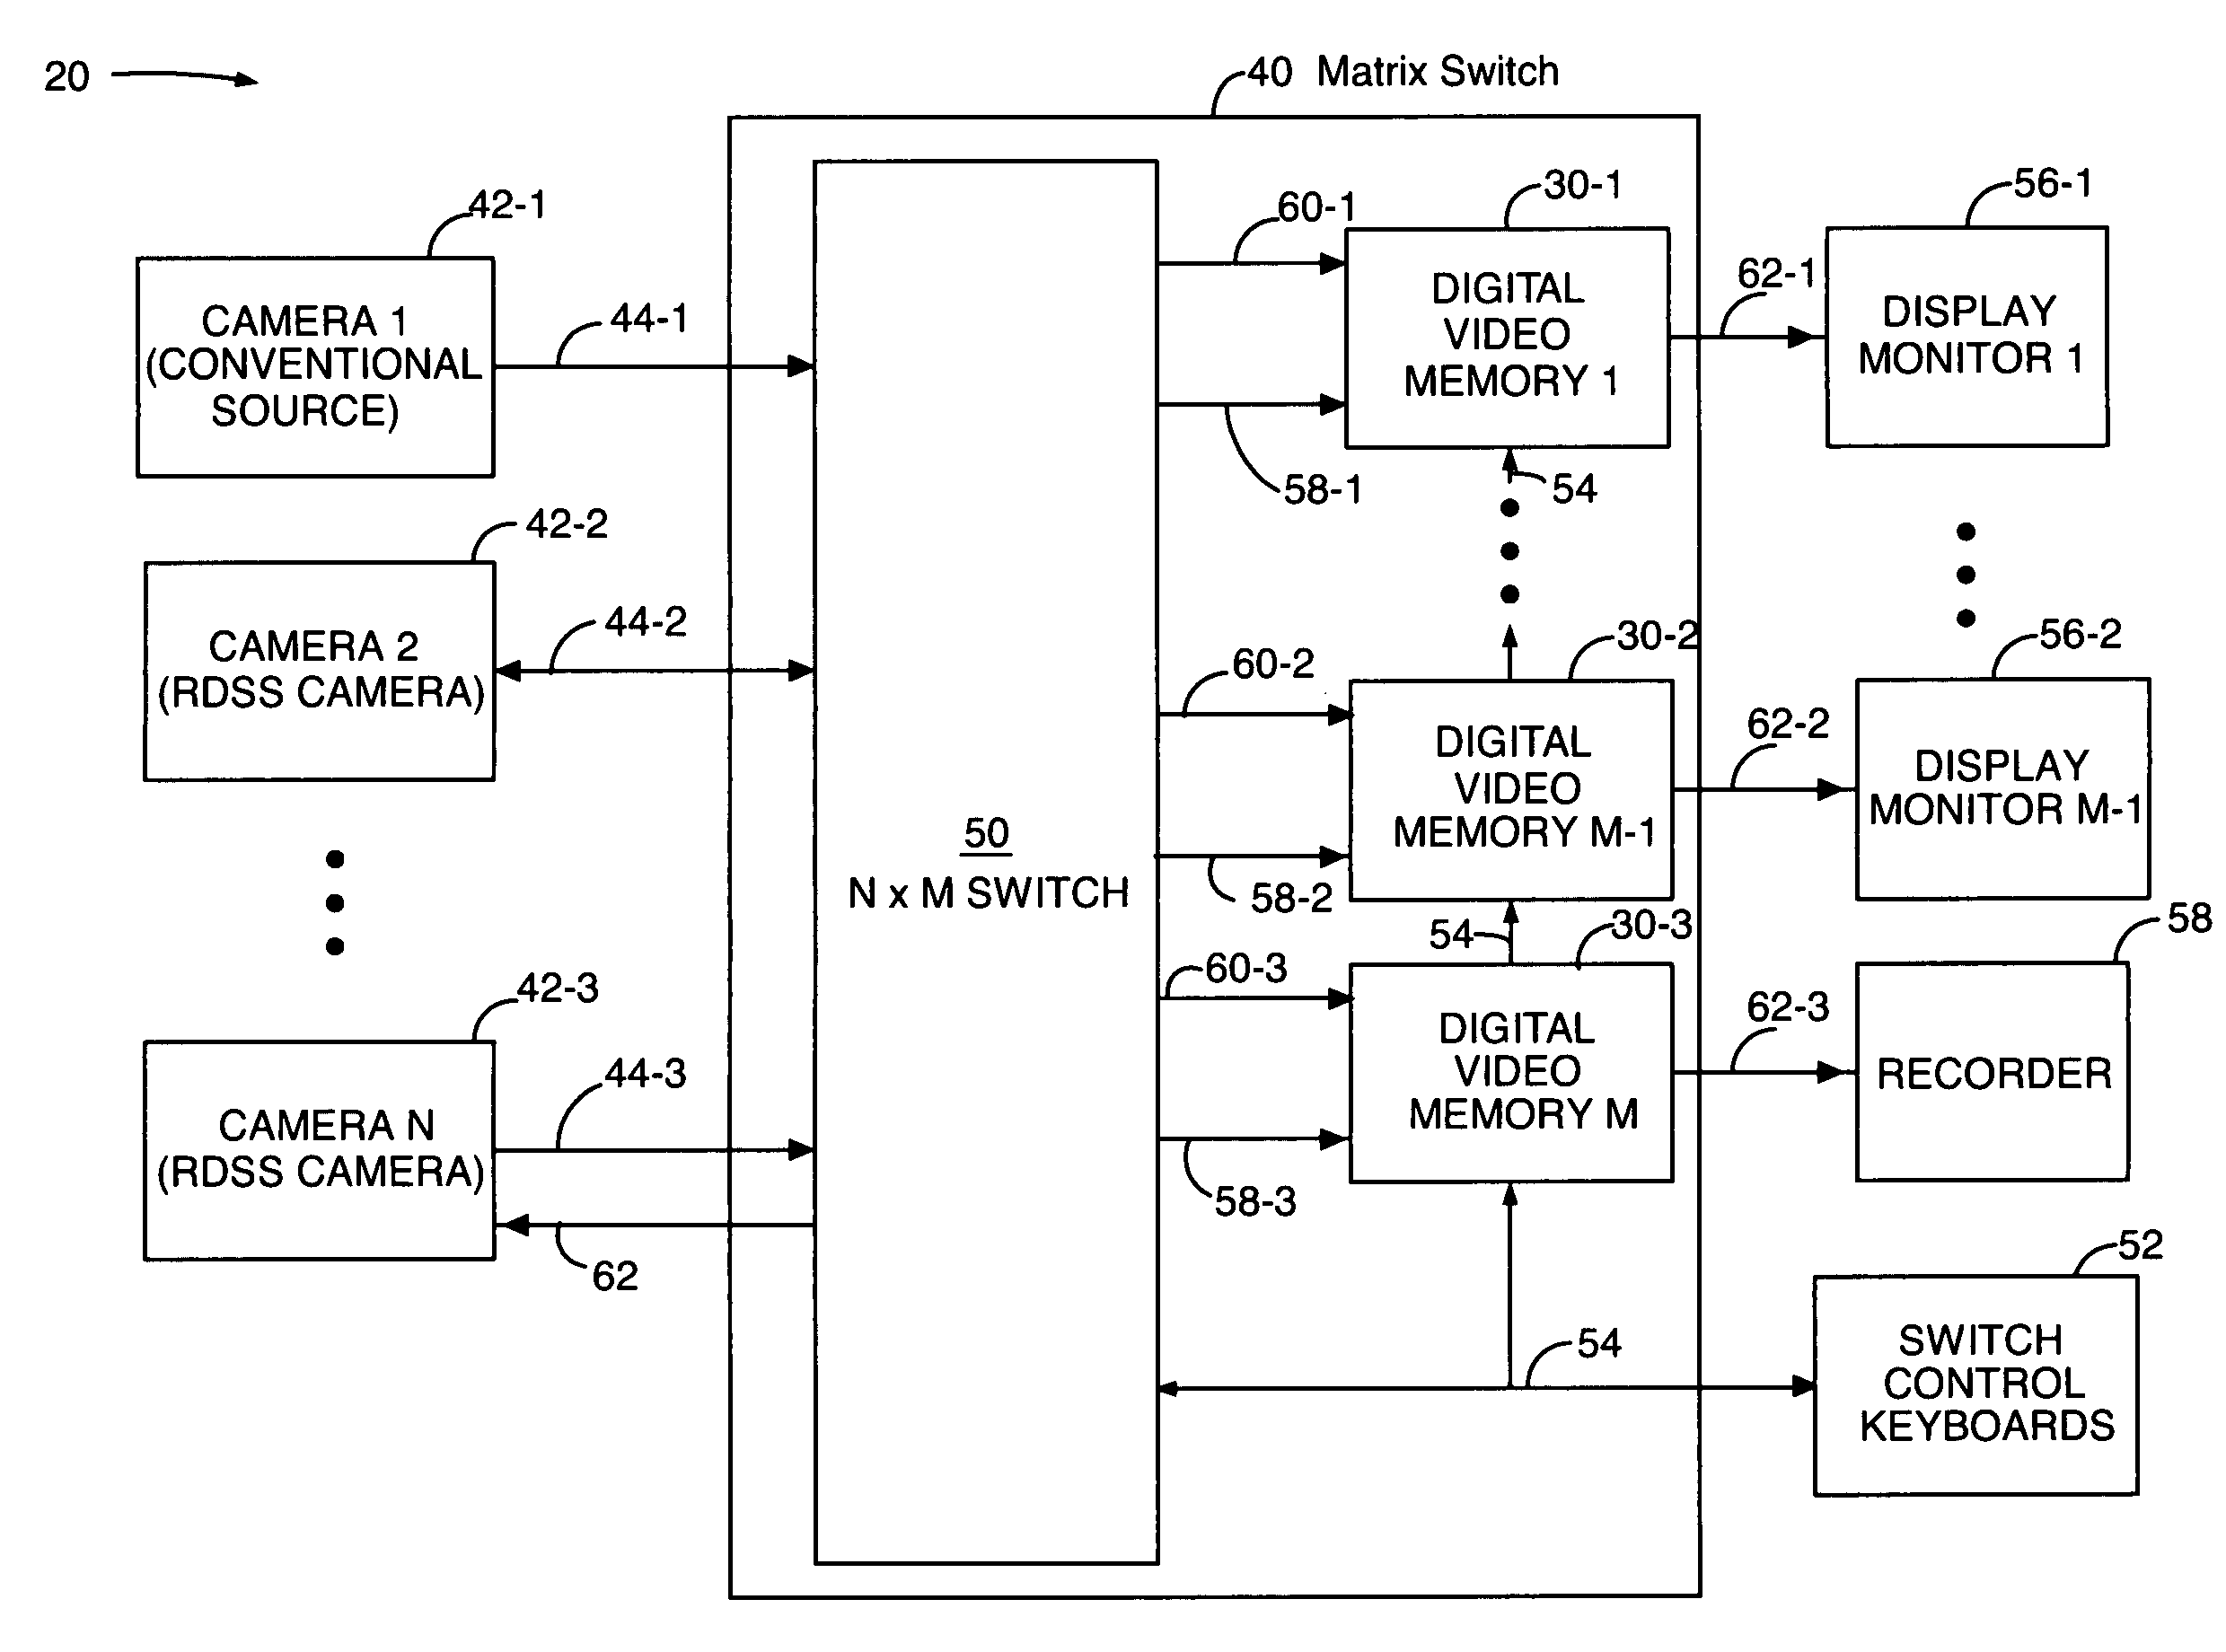 Multi-camera system for implementing digital slow shutter video processing using shared video memory